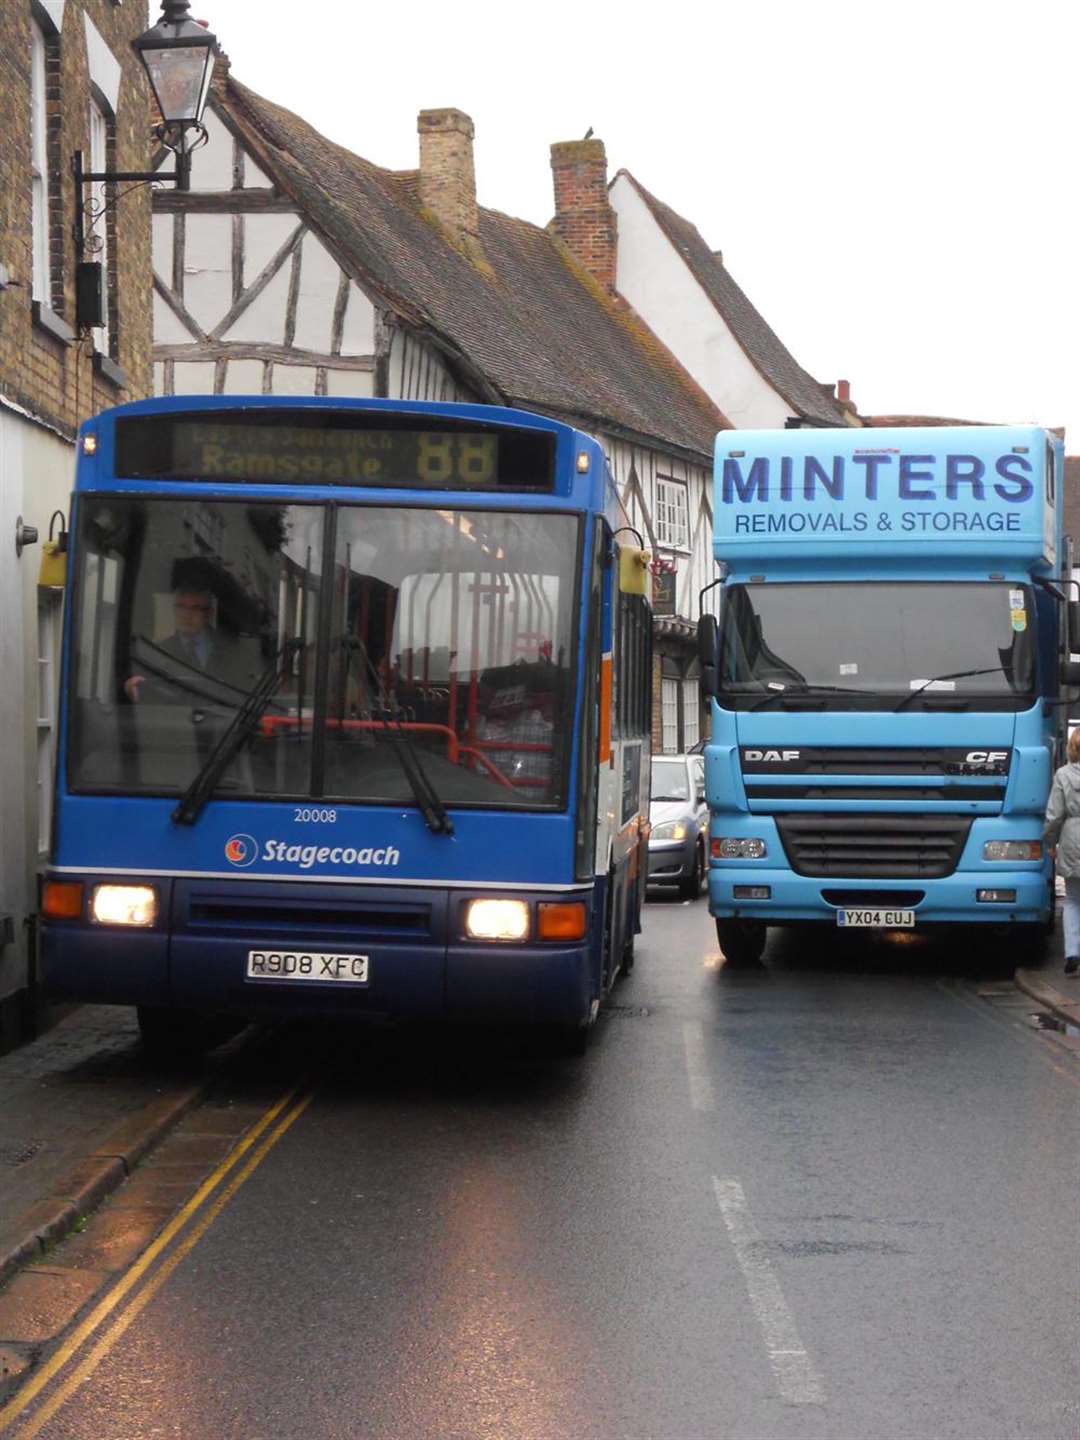 Bus has to drive on pavement due to parked lorry.